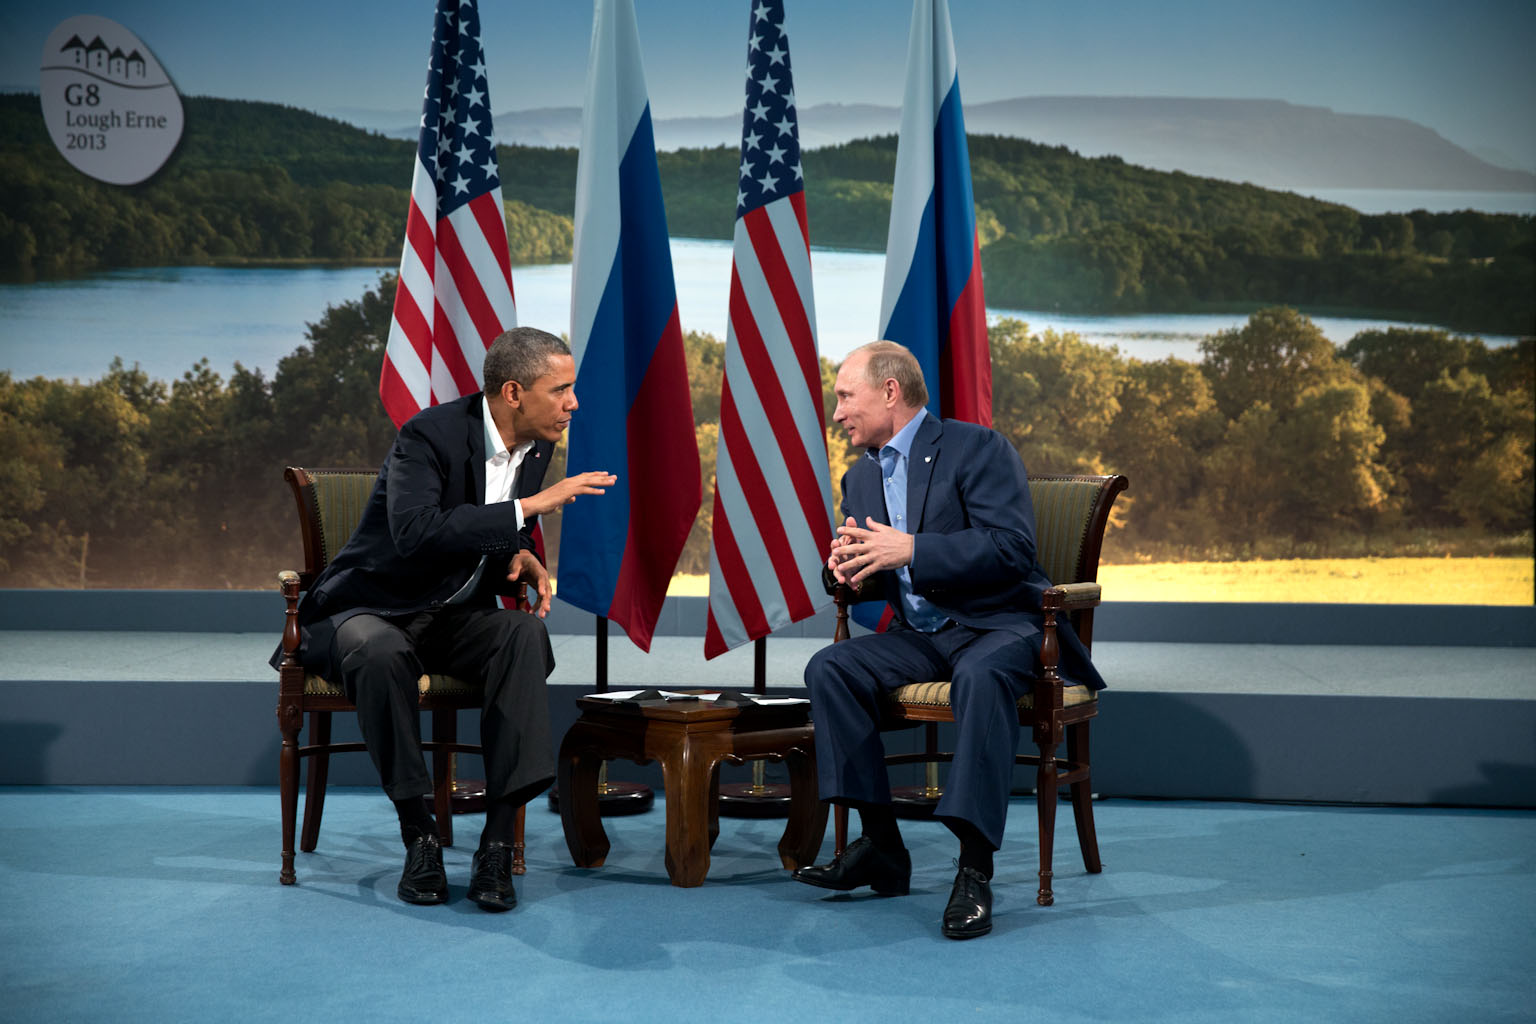 President Barack Obama meets with Russian President Vladmir Putin during a bilateral at the G8 Summit in Lough Erne